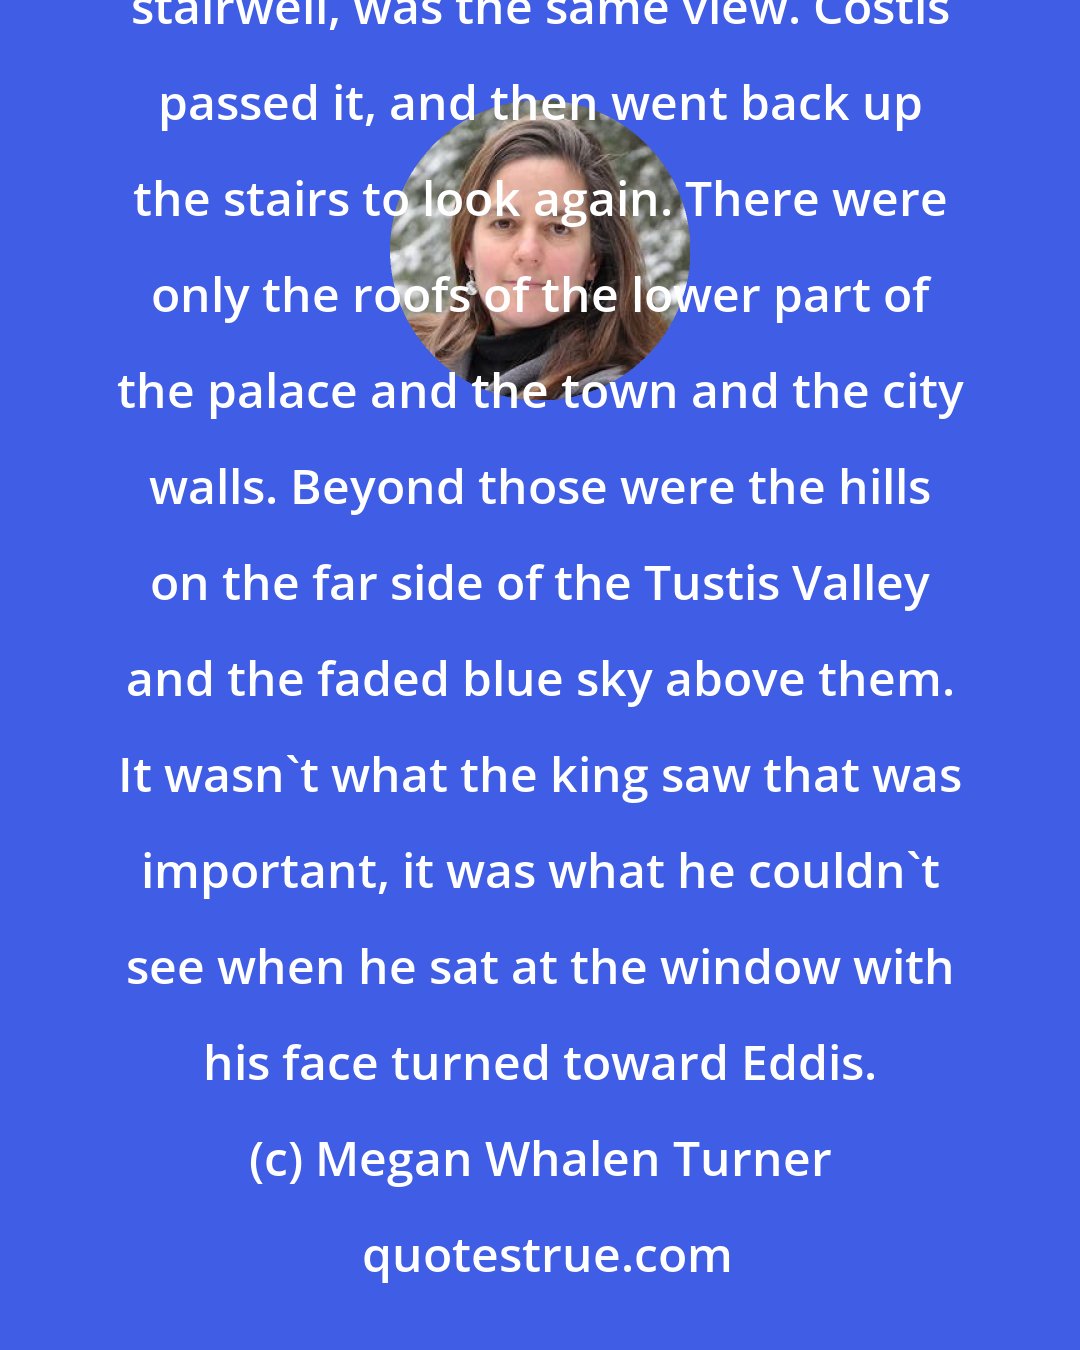 Megan Whalen Turner: The window opened in the same direction as the king's, and there, summer-bright and framed by the darkness of the stairwell, was the same view. Costis passed it, and then went back up the stairs to look again. There were only the roofs of the lower part of the palace and the town and the city walls. Beyond those were the hills on the far side of the Tustis Valley and the faded blue sky above them. It wasn't what the king saw that was important, it was what he couldn't see when he sat at the window with his face turned toward Eddis.